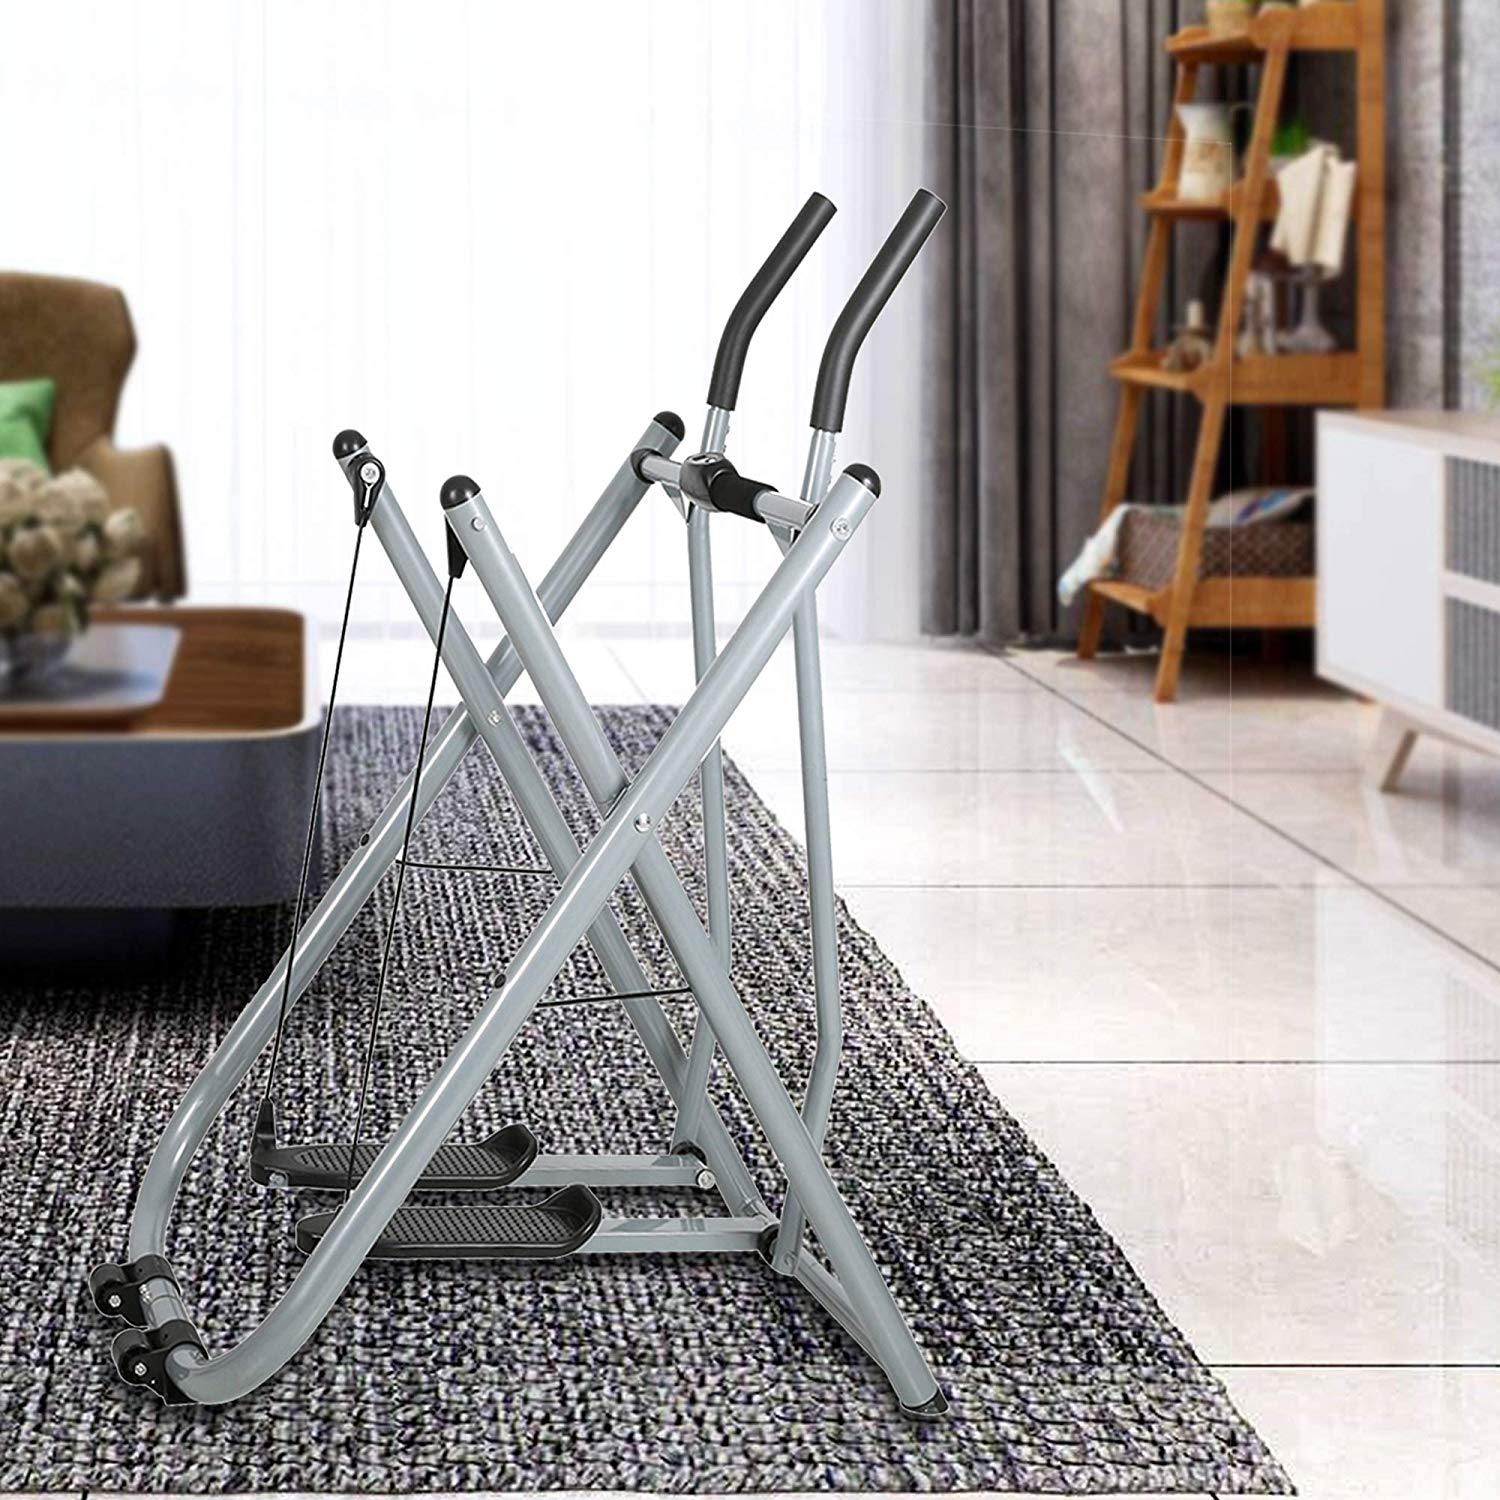 Bosonshop Step Machine Trainer Folding Air Walker Exercise Health Fitness with LCD Display for Home,Gym